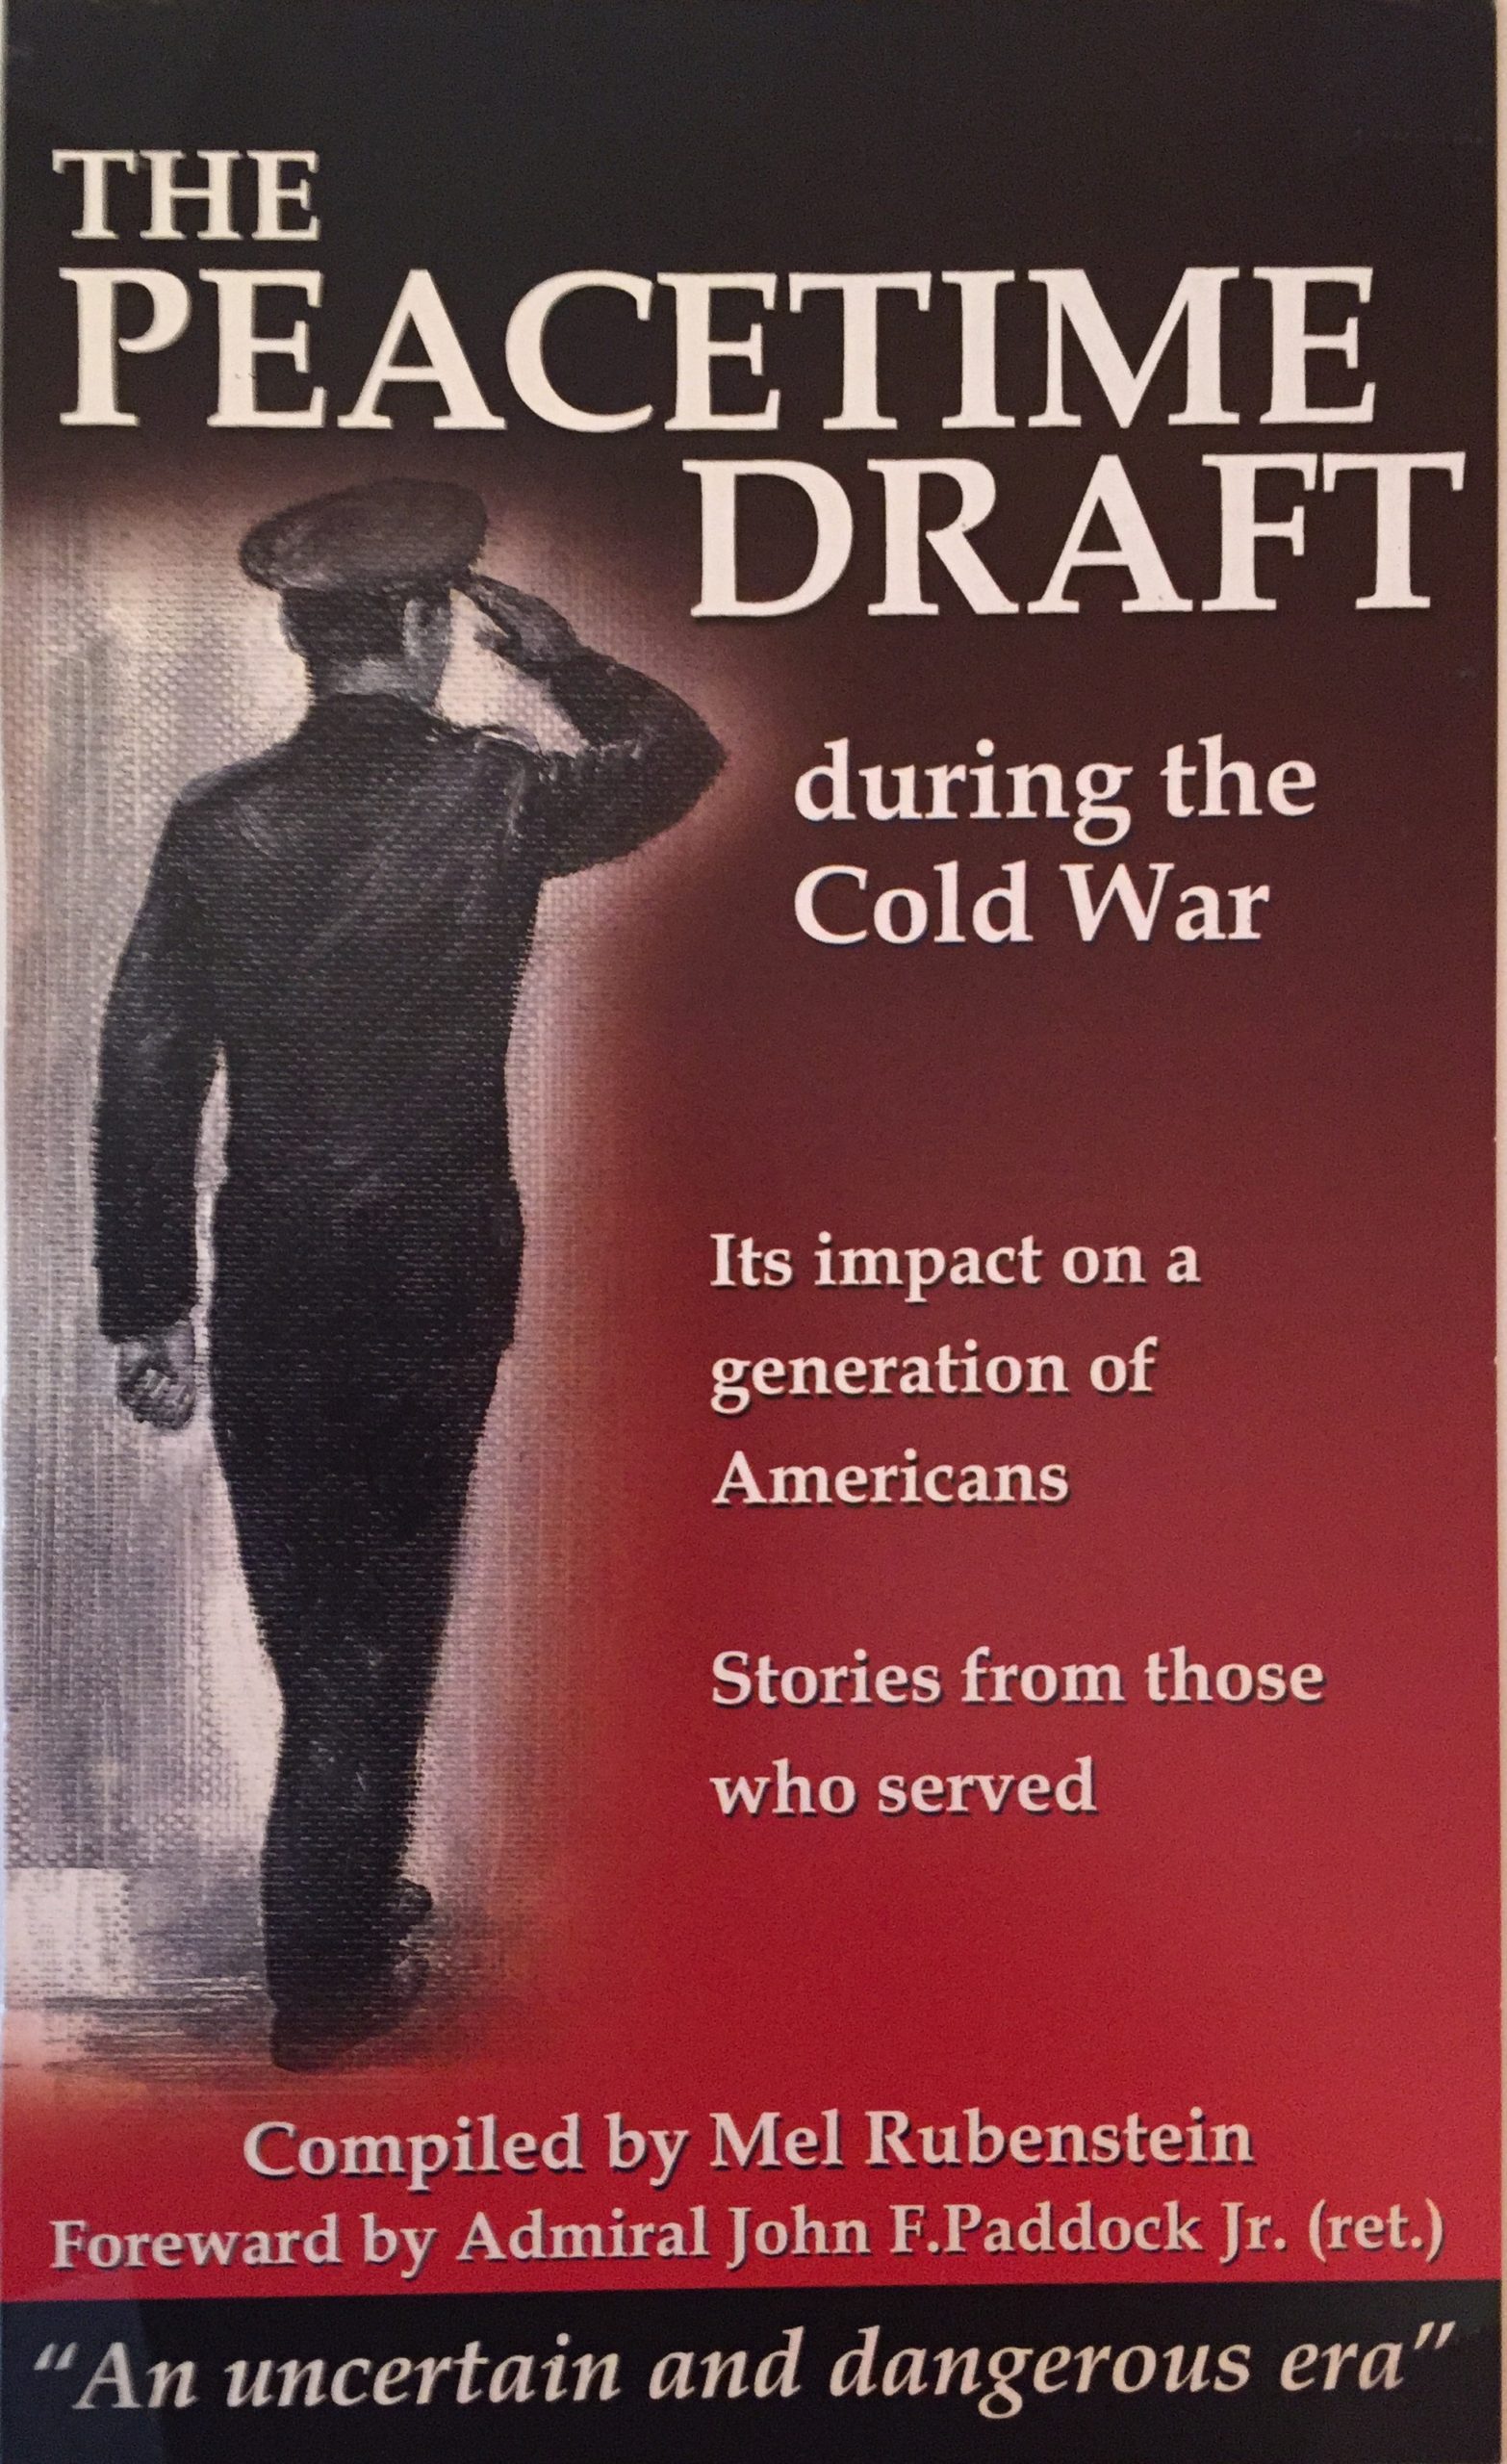 The Peacetime Draft During the Cold War 1953-1964: Its Impact on a Generation of Americans (Stories From Those Who Served)